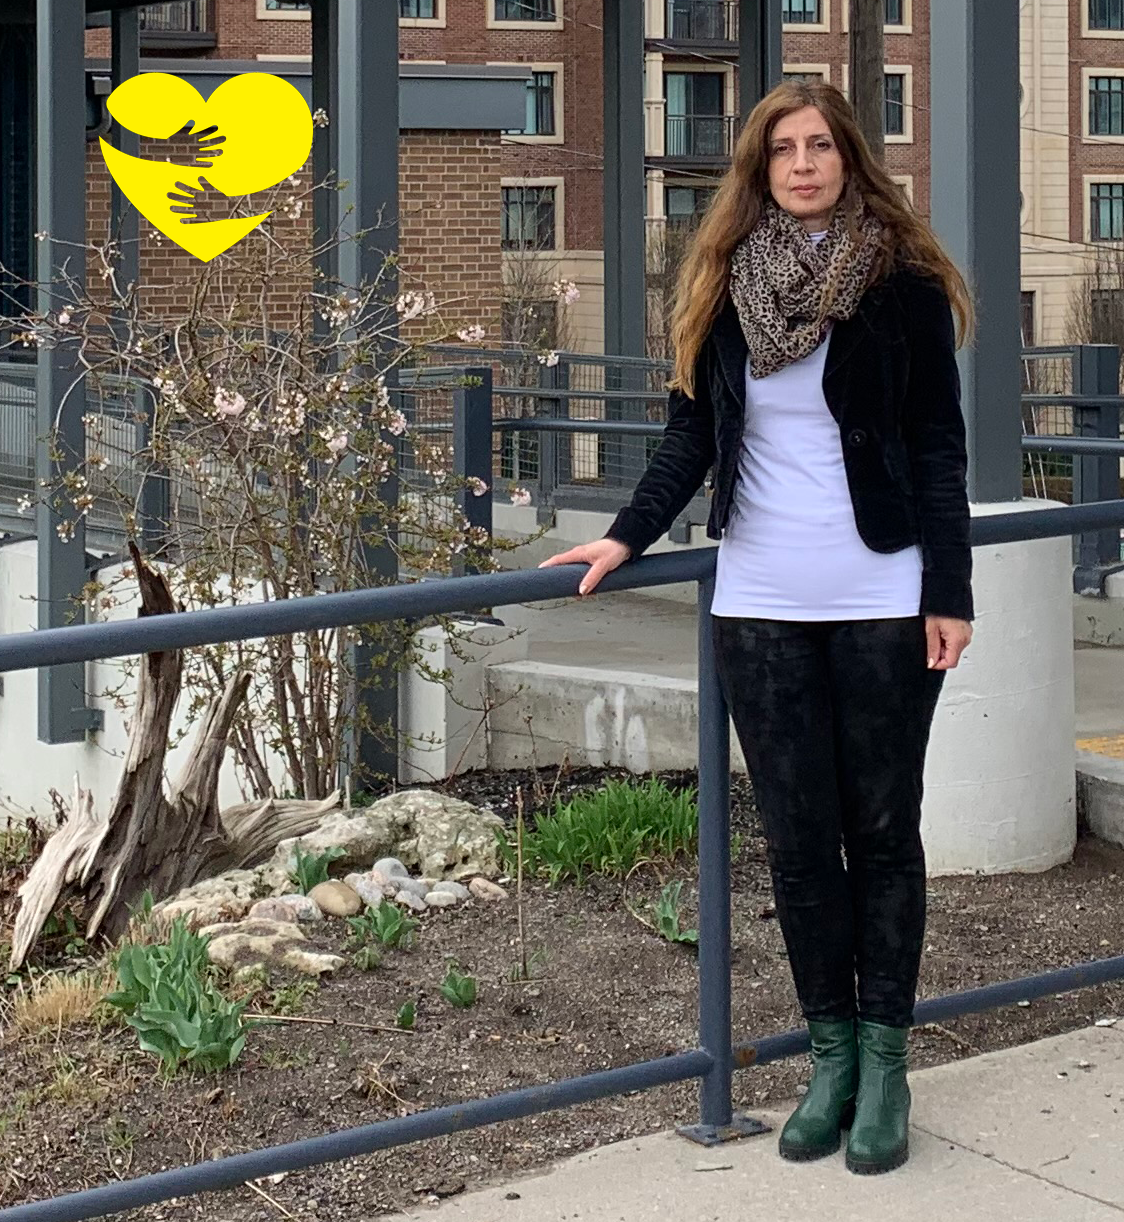 Rositsa, standing outside holding a railing. A graphic of arms hugging a yellow cartoon heart can be found in the top left corner.